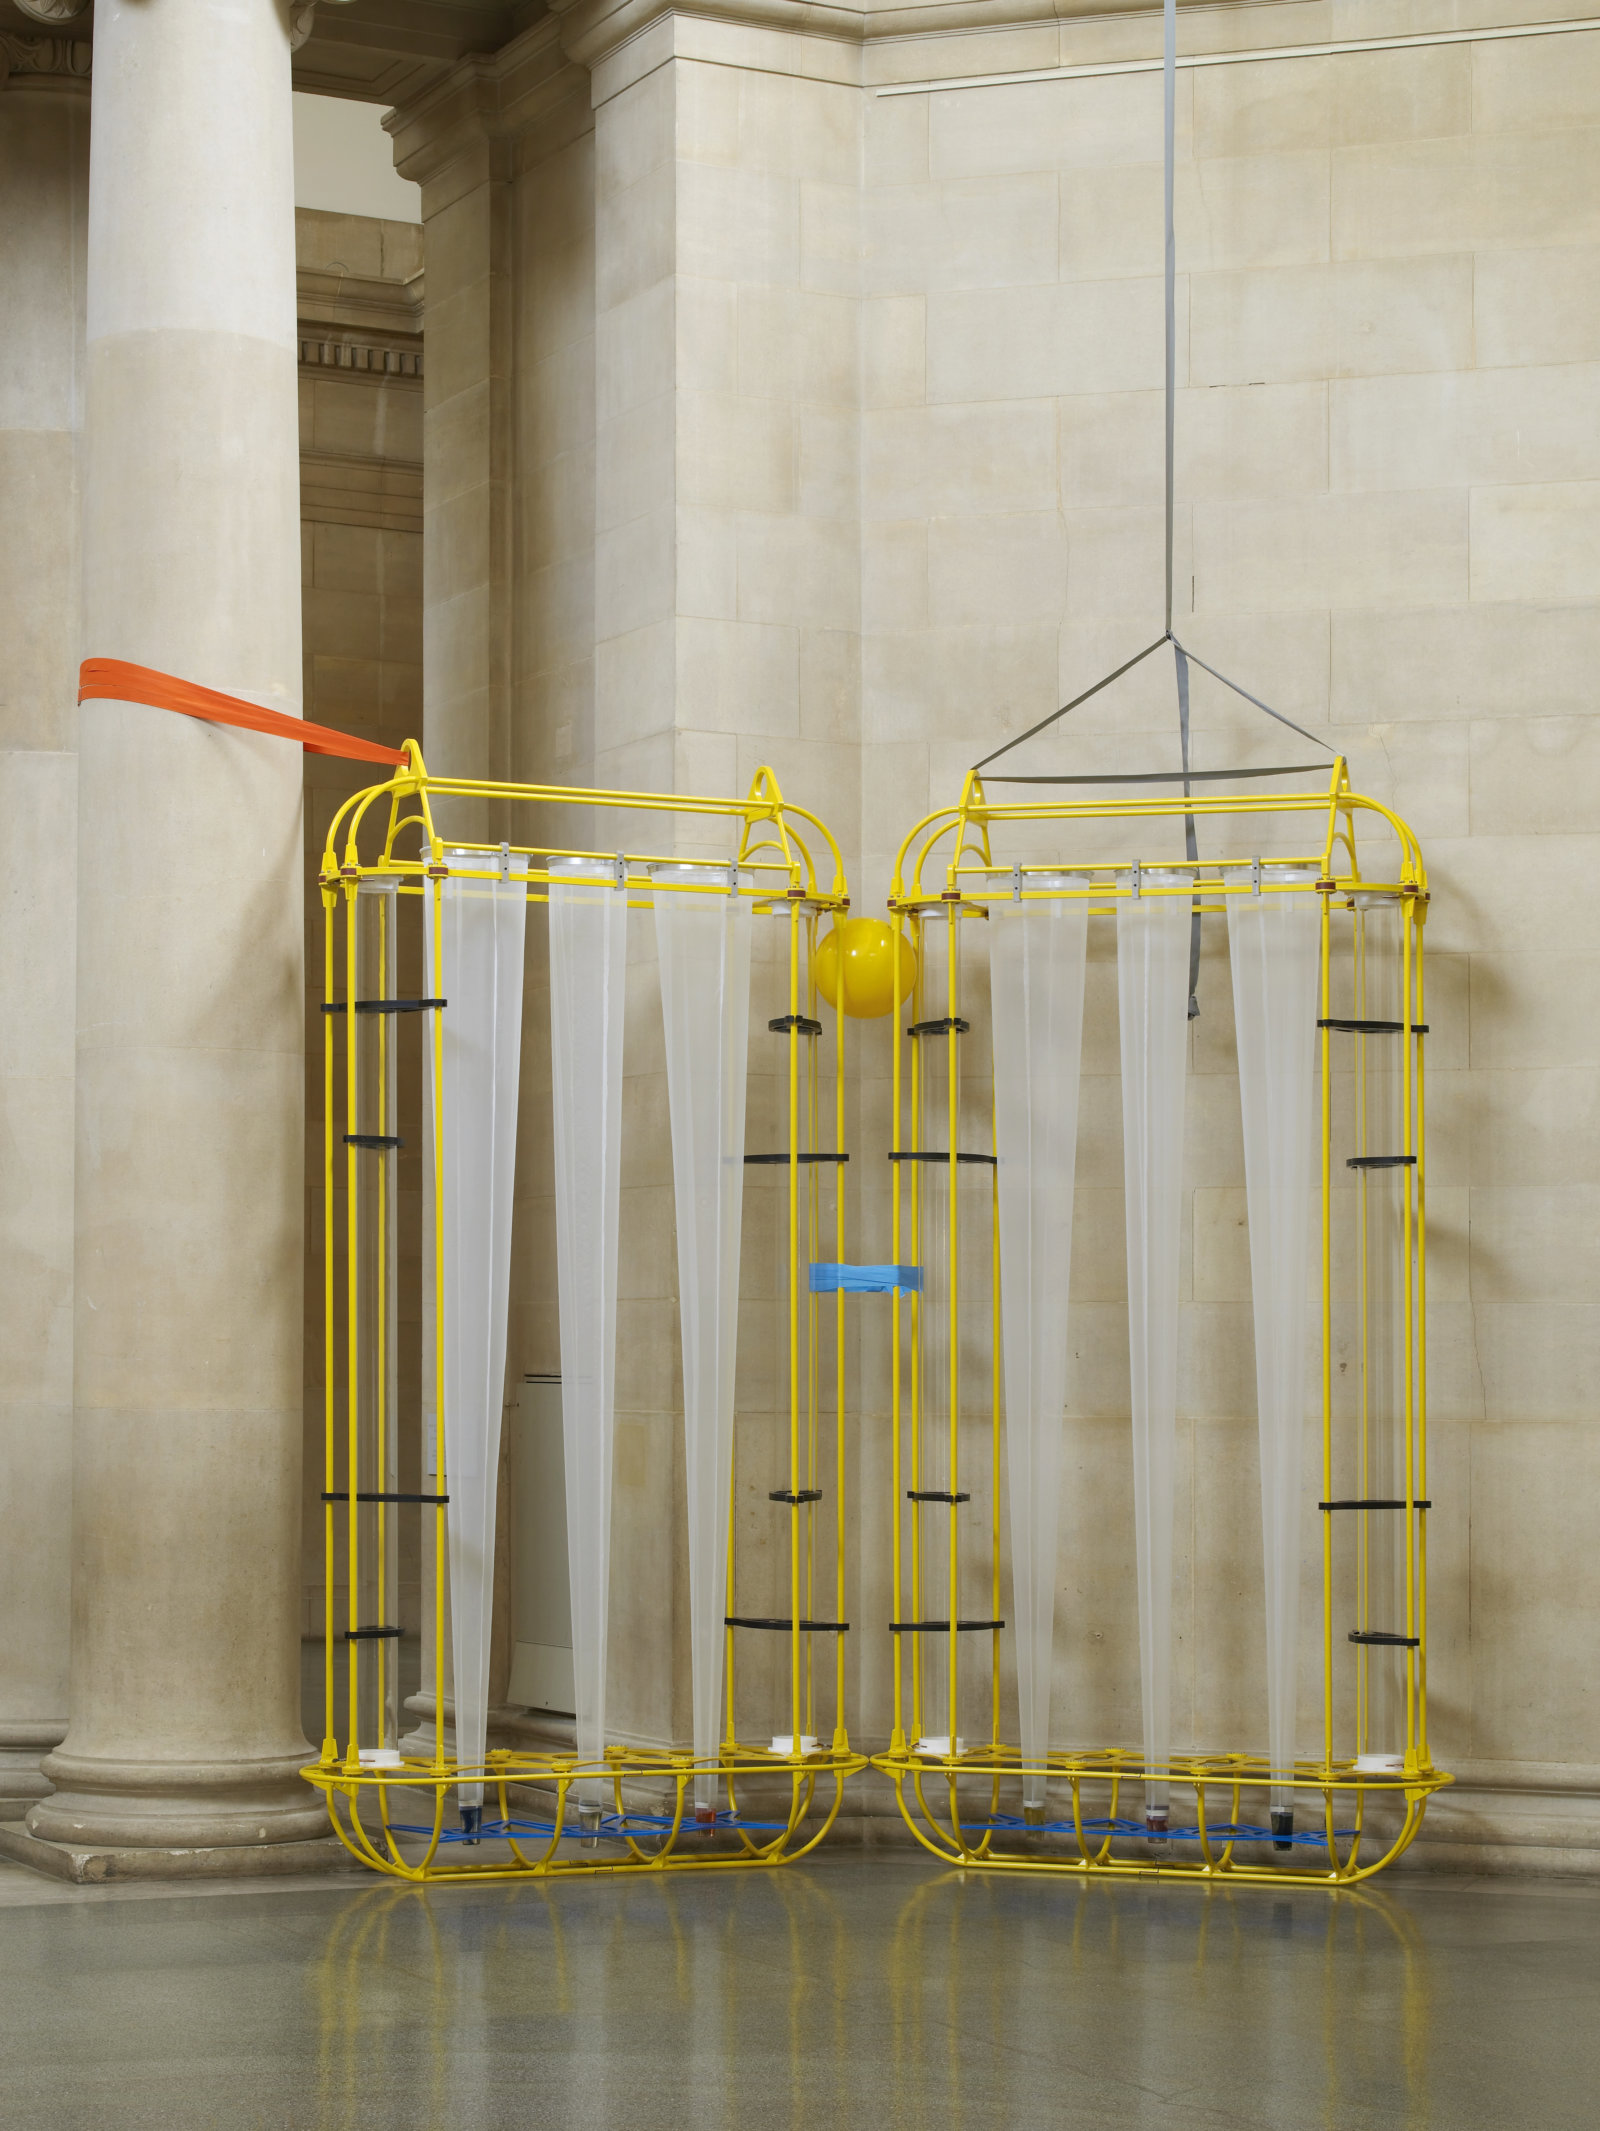 Christina Mackie, The Yellow Machines, 2015, steel, aluminum, acrylic, styrene, copper, stainless steel, nylon webbing, polyethylene, nylon, resin, rubber, 128 x 160 x 32 in. (326 x 406 x 80 cm). Installation view, the filters, Tate Britain, London, UK, 2015